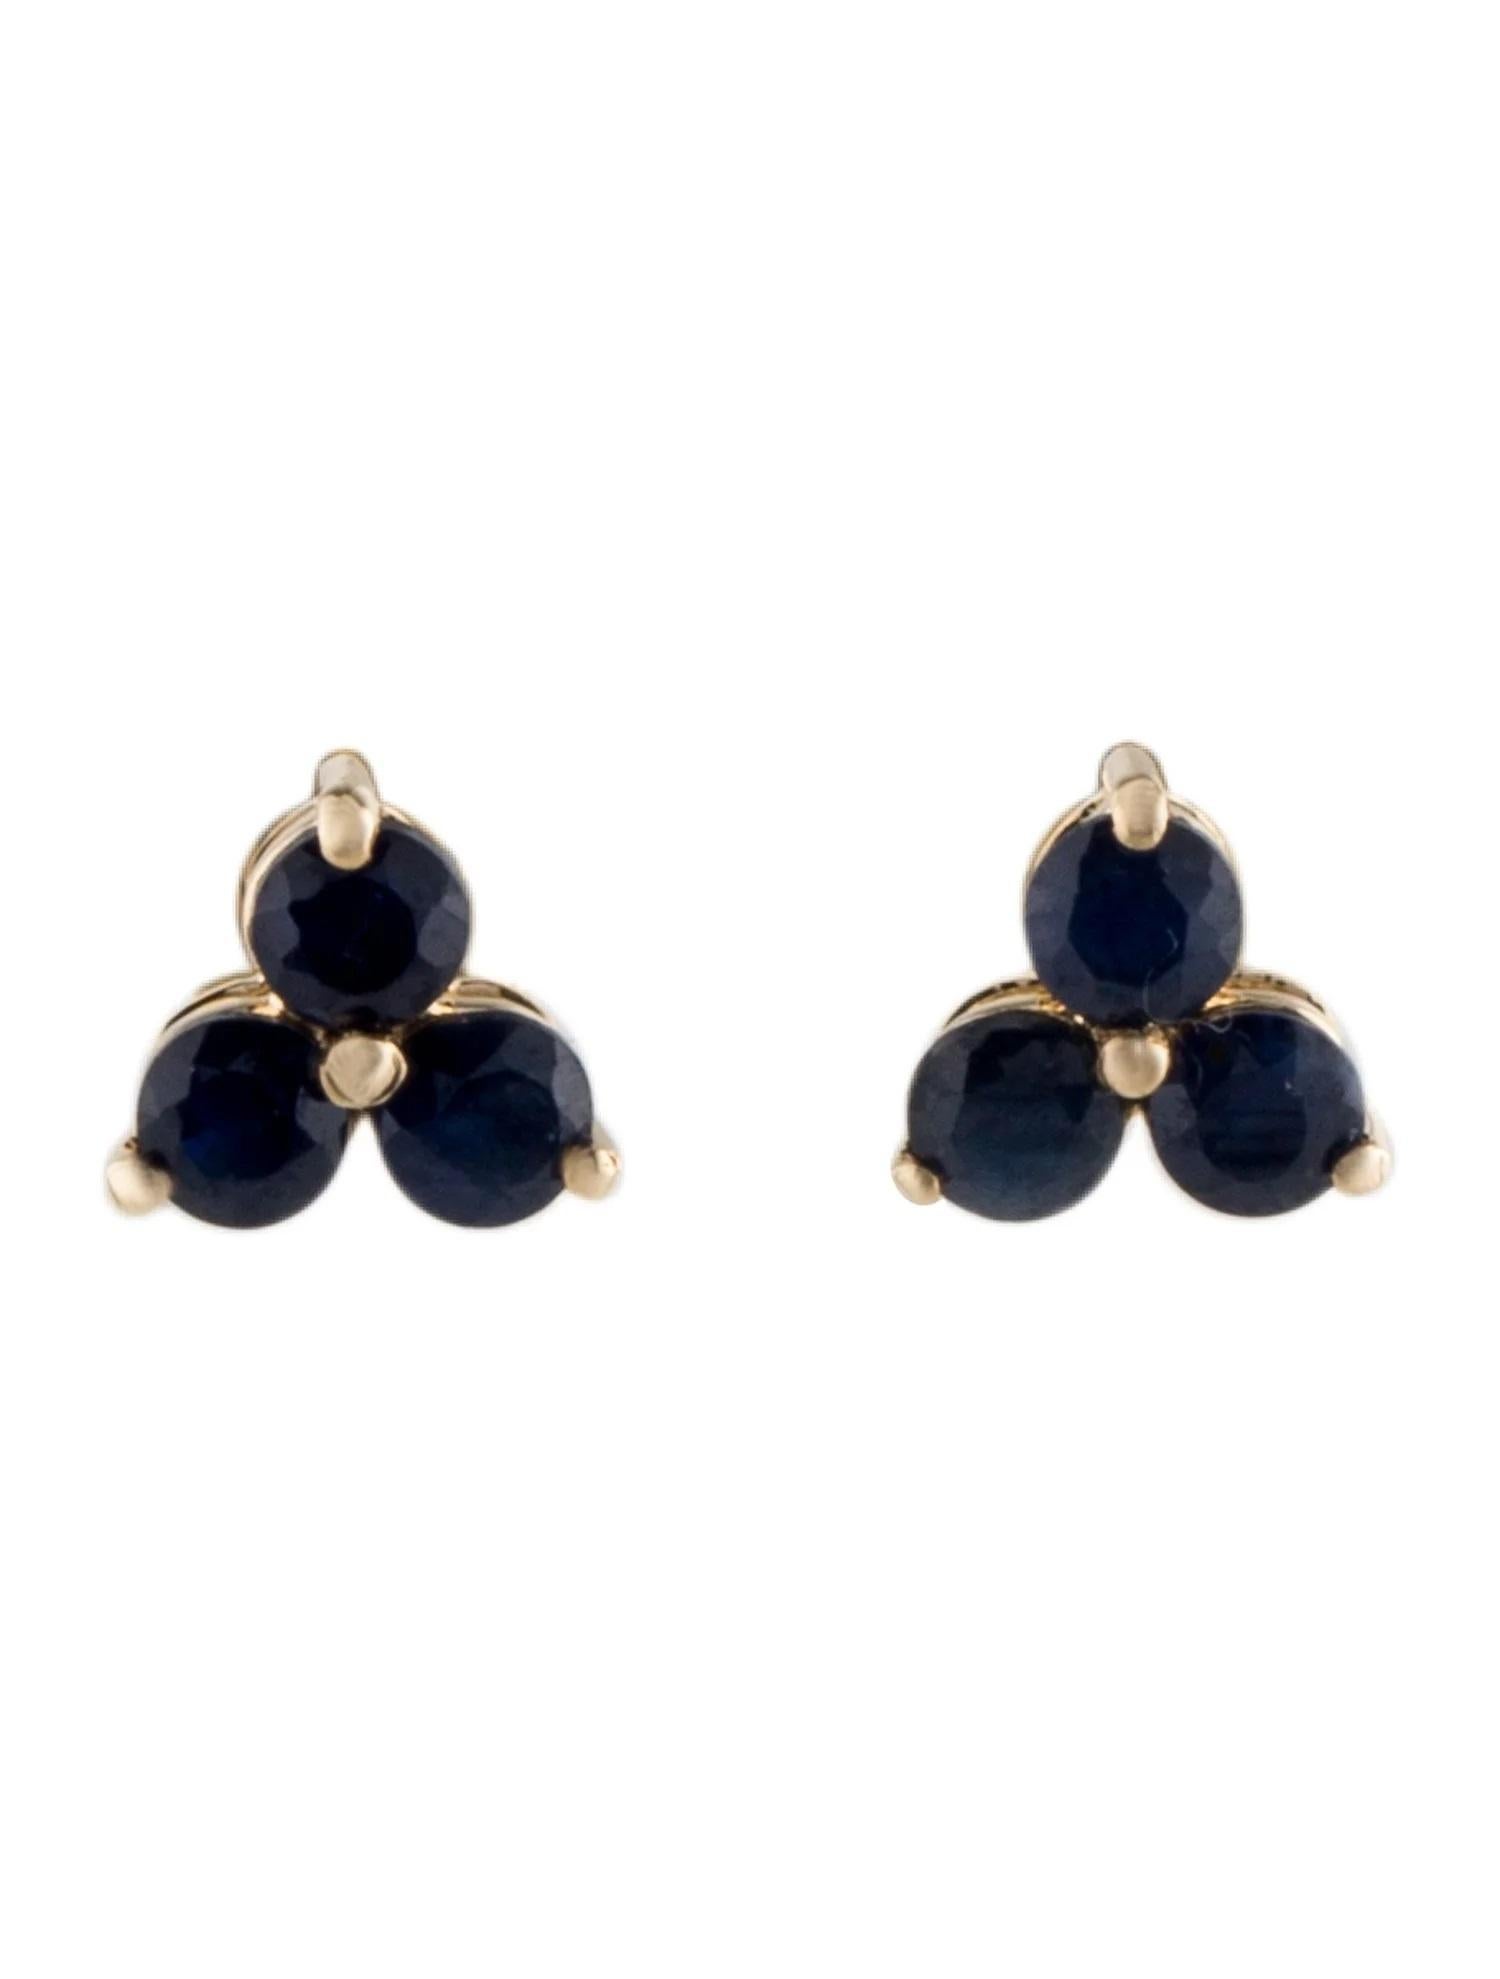 Round Cut 14K Sapphire Stud Earrings - Elegant Round Modified Brilliant Stones For Sale